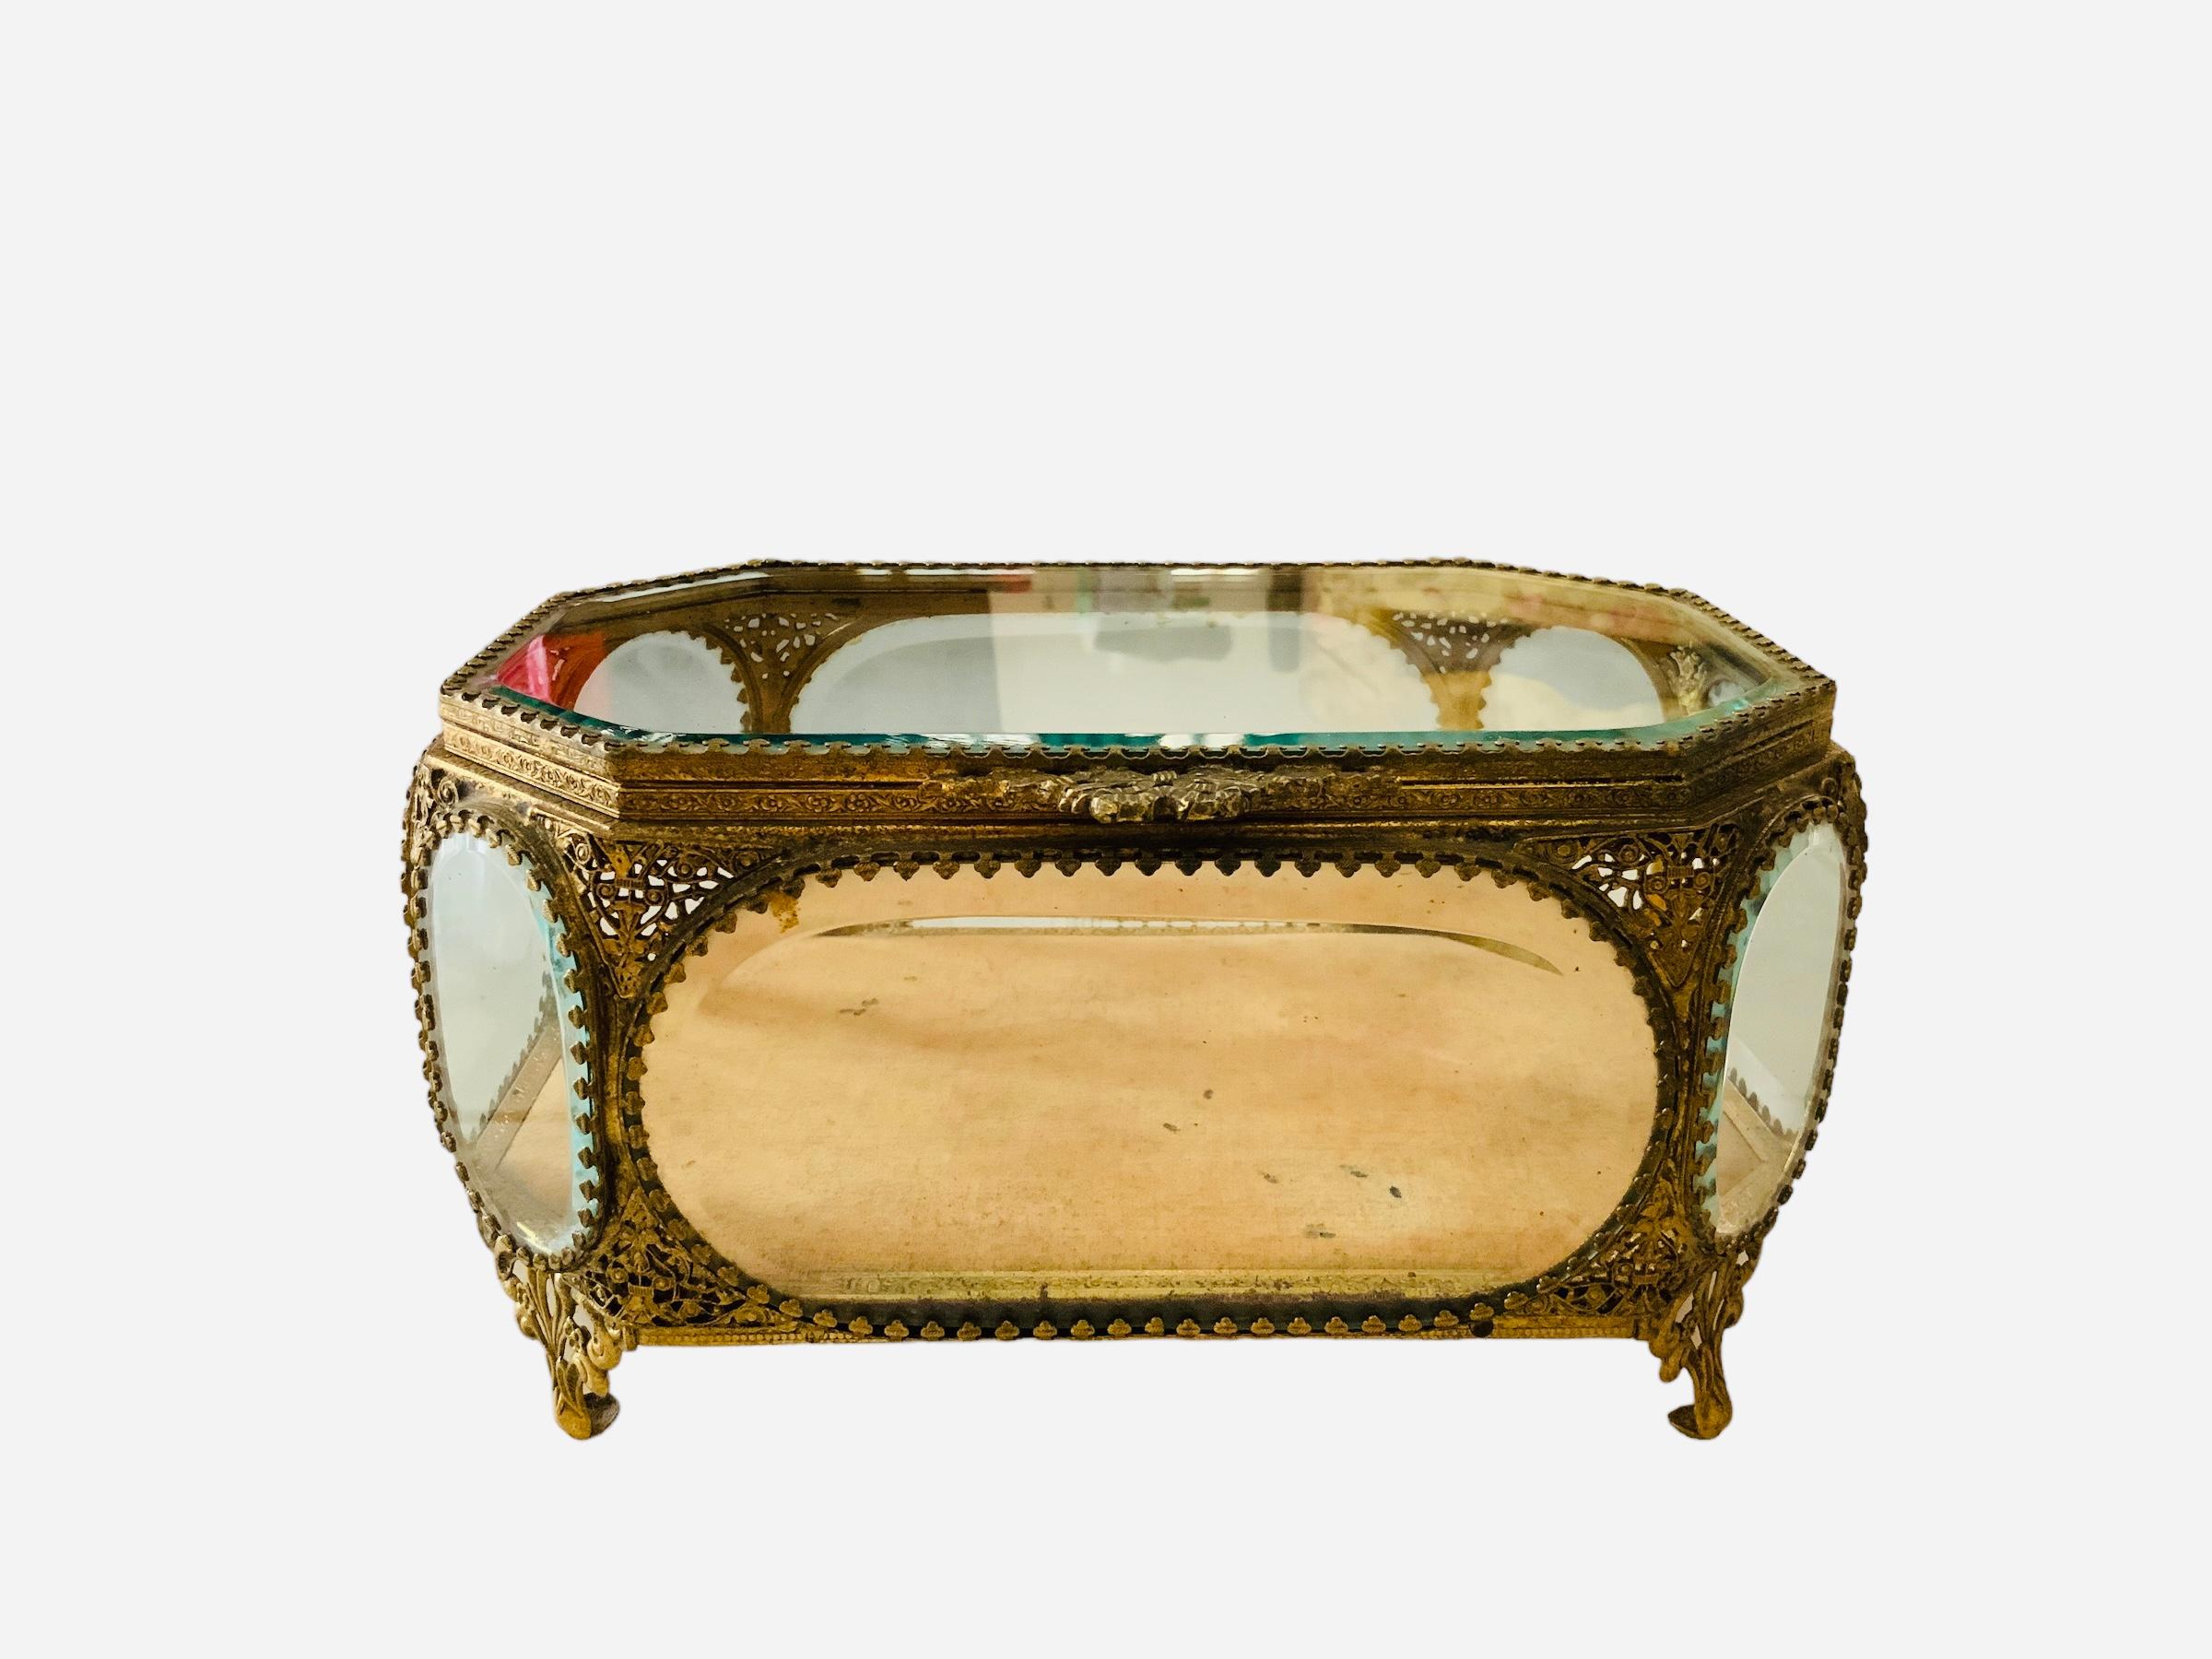 20th Century Victorian Style Gilt Metal Octagonal Shaped Casket/Jewelry Box For Sale